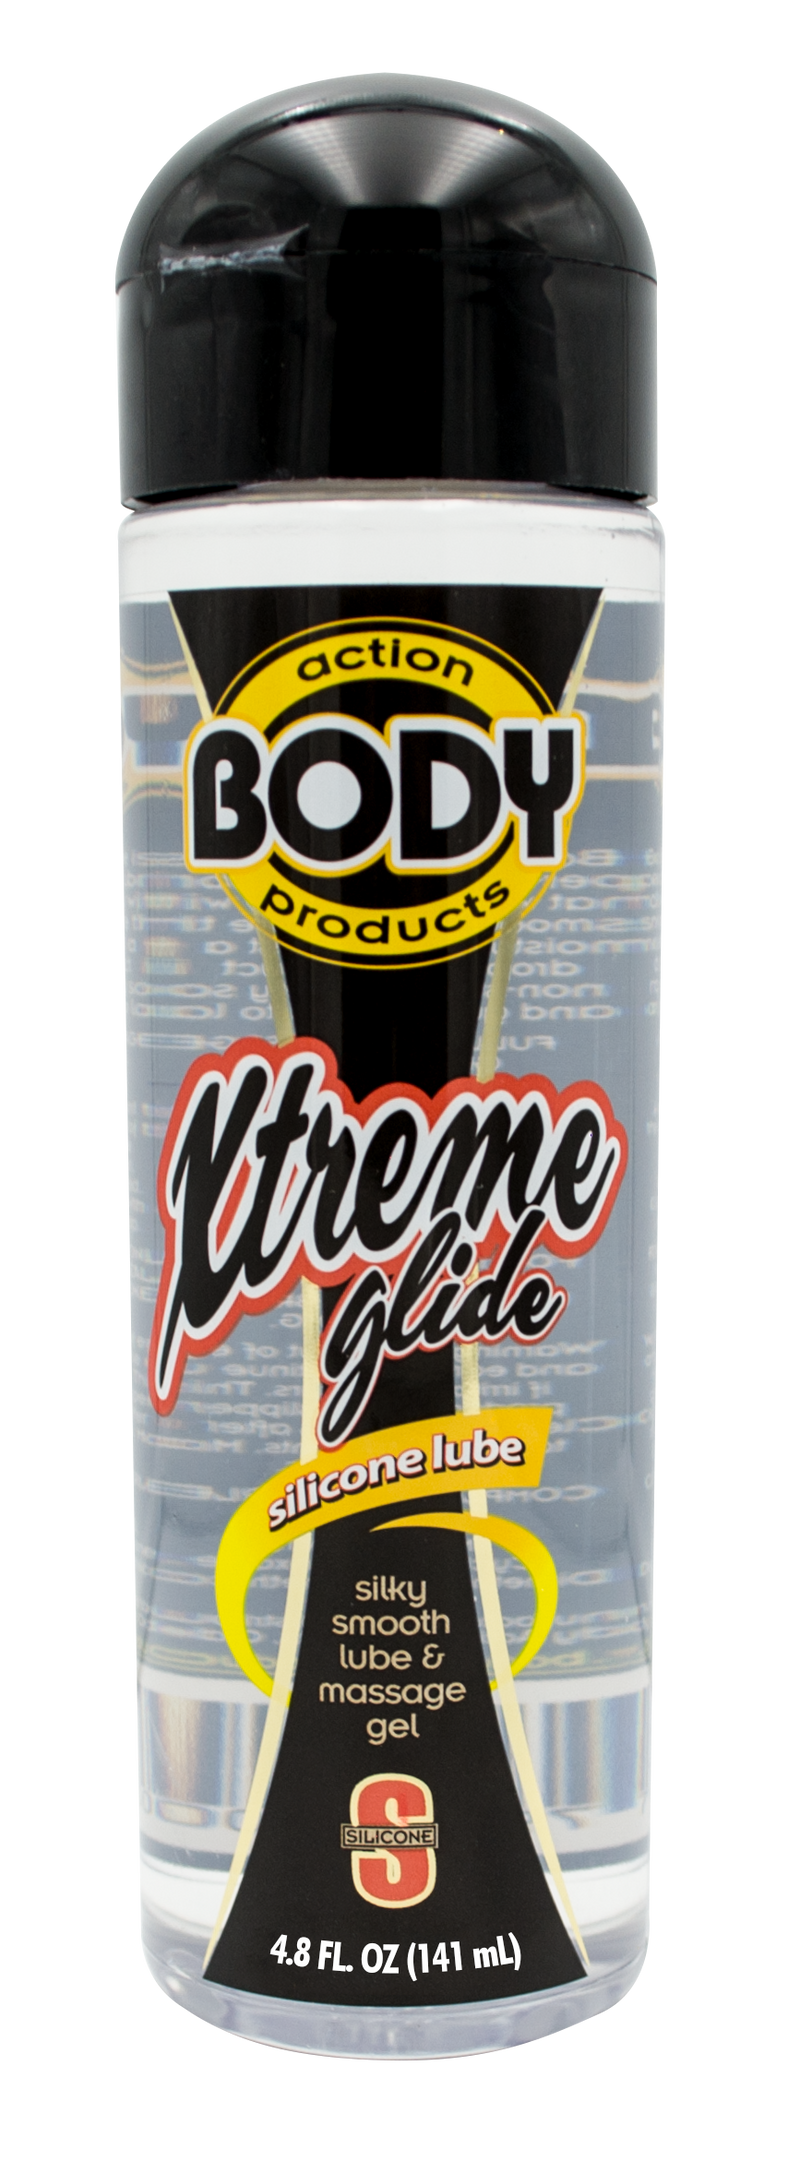 Xtreme Glide: The Ultimate Silicone-Based Lubricant for Unmatched Slip and Slide.